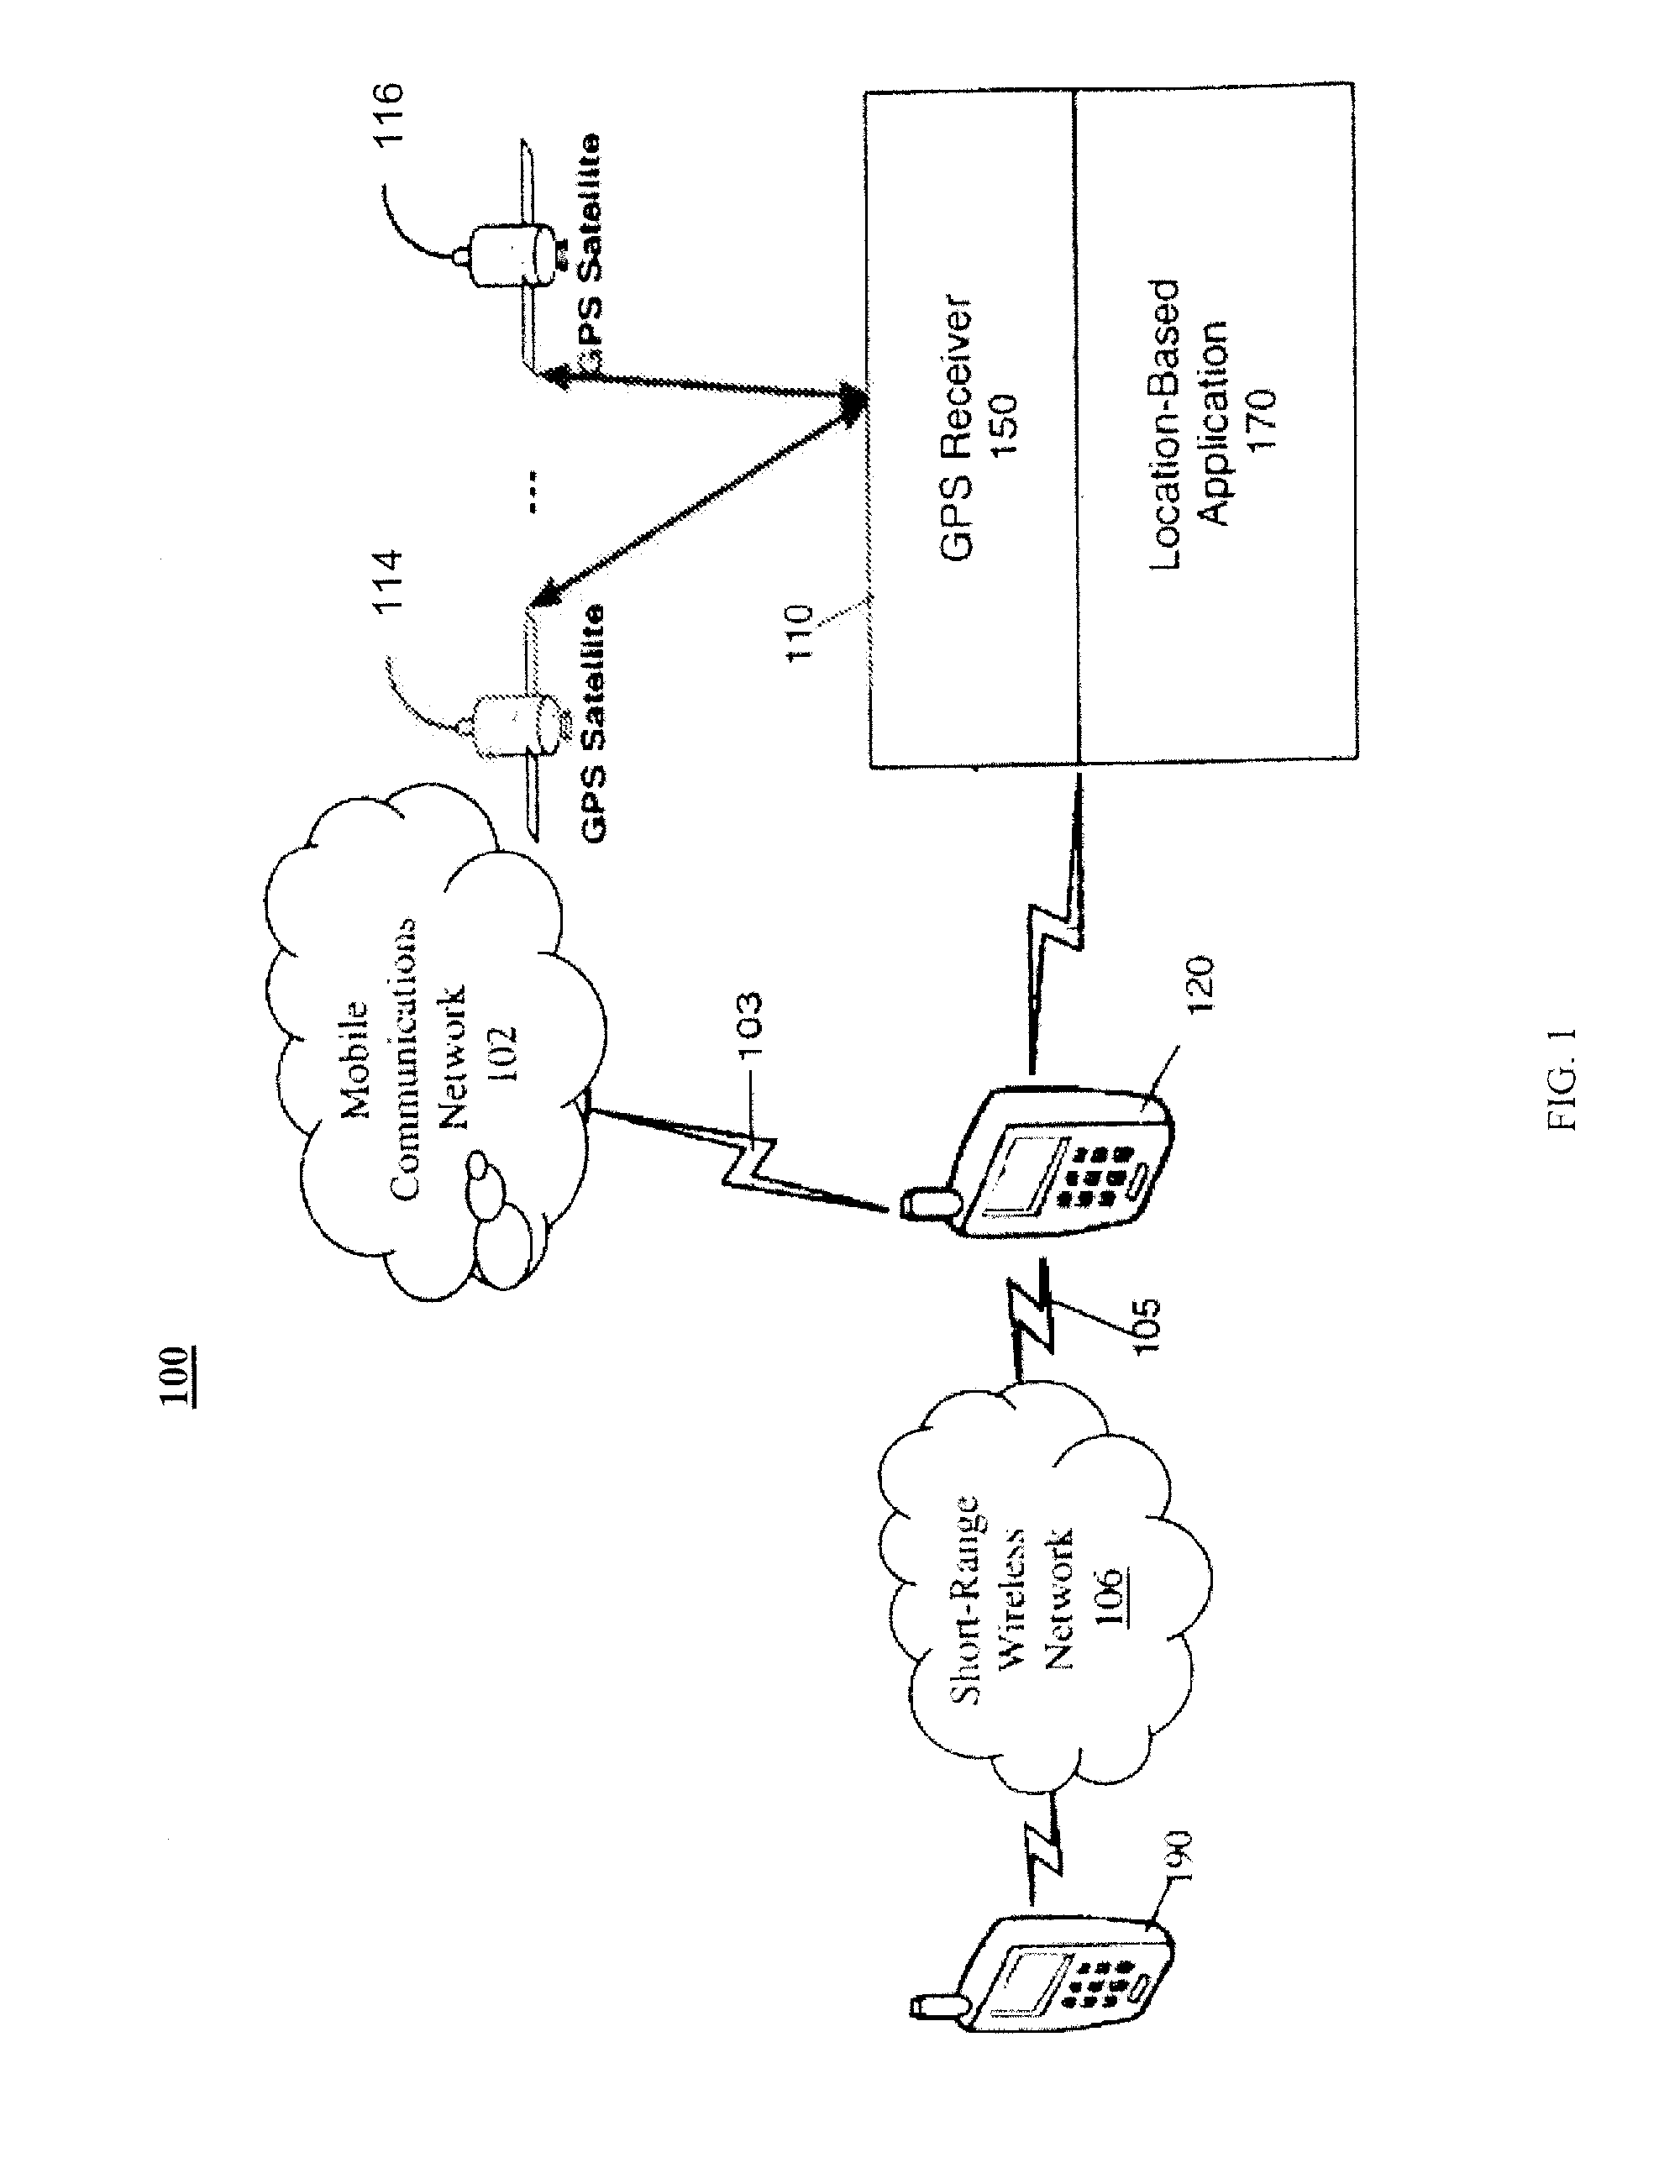 GPS with aiding from ad-hoc peer-to-peer bluetooth networks